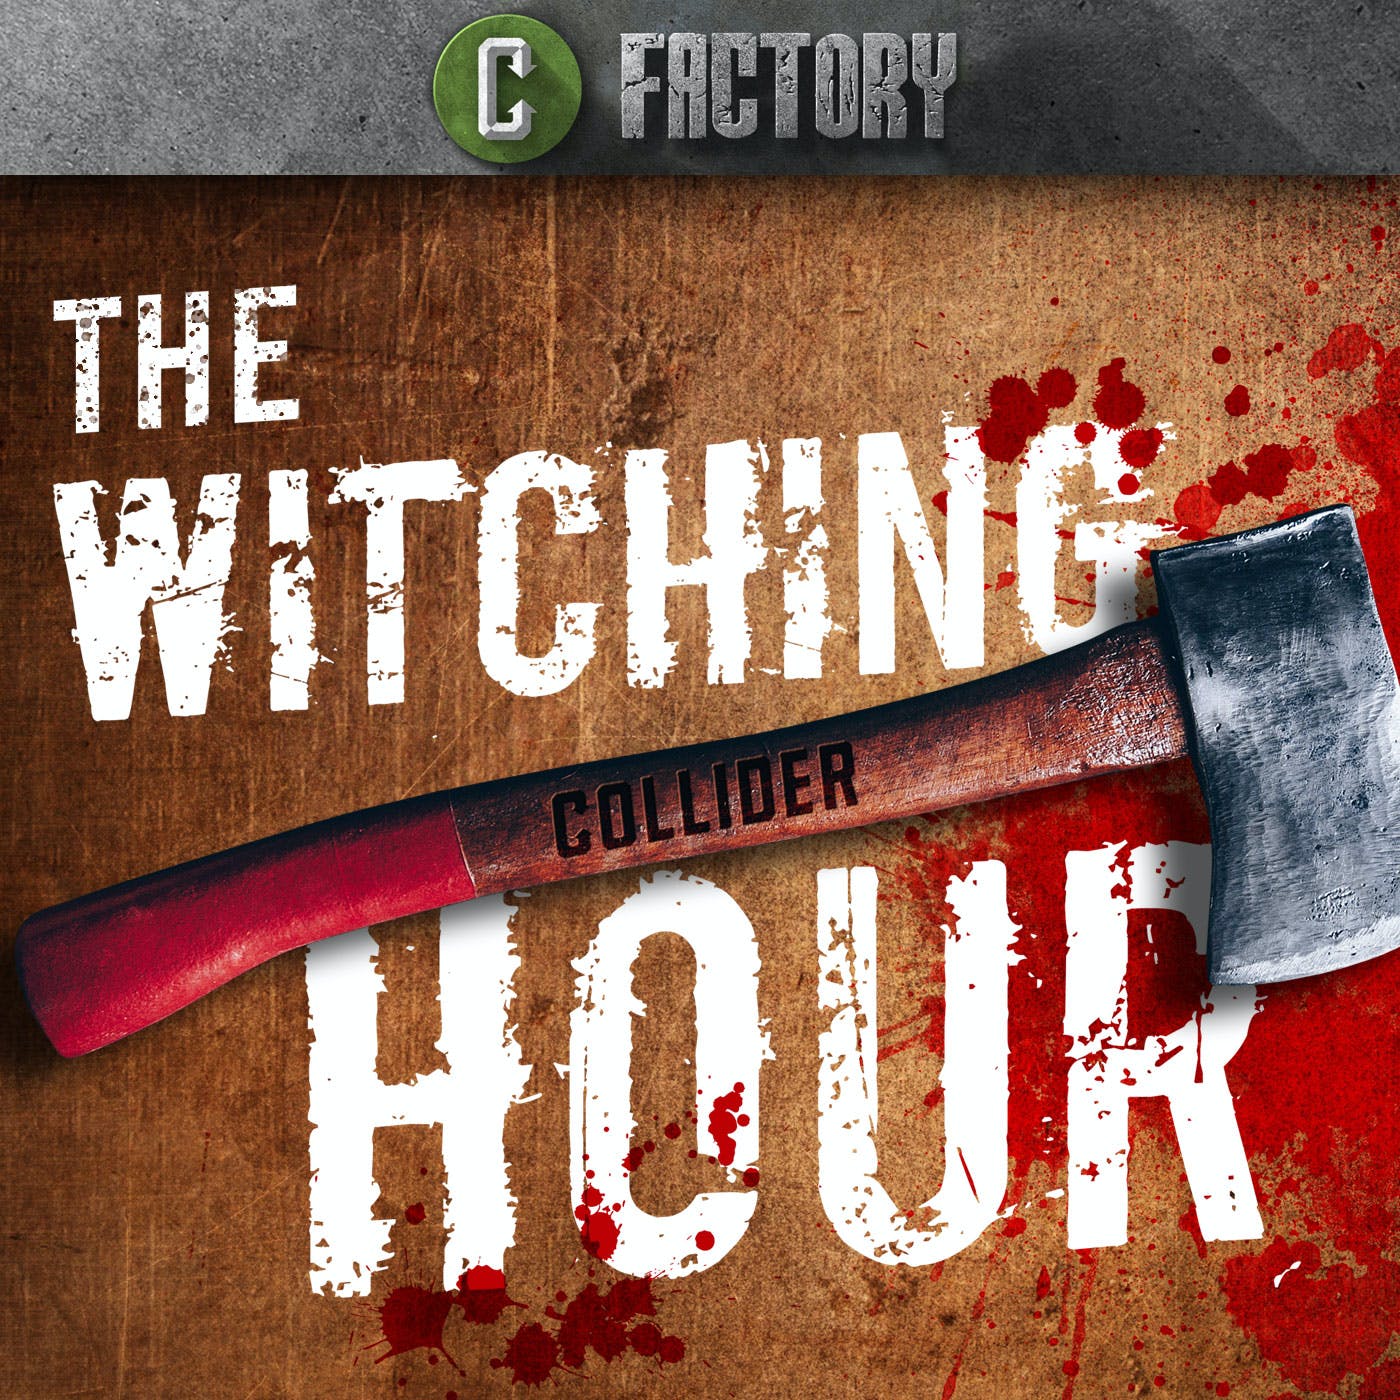 Antebellum Filmmakers Break Down Historical Horrors and That Ending - The Witching Hour